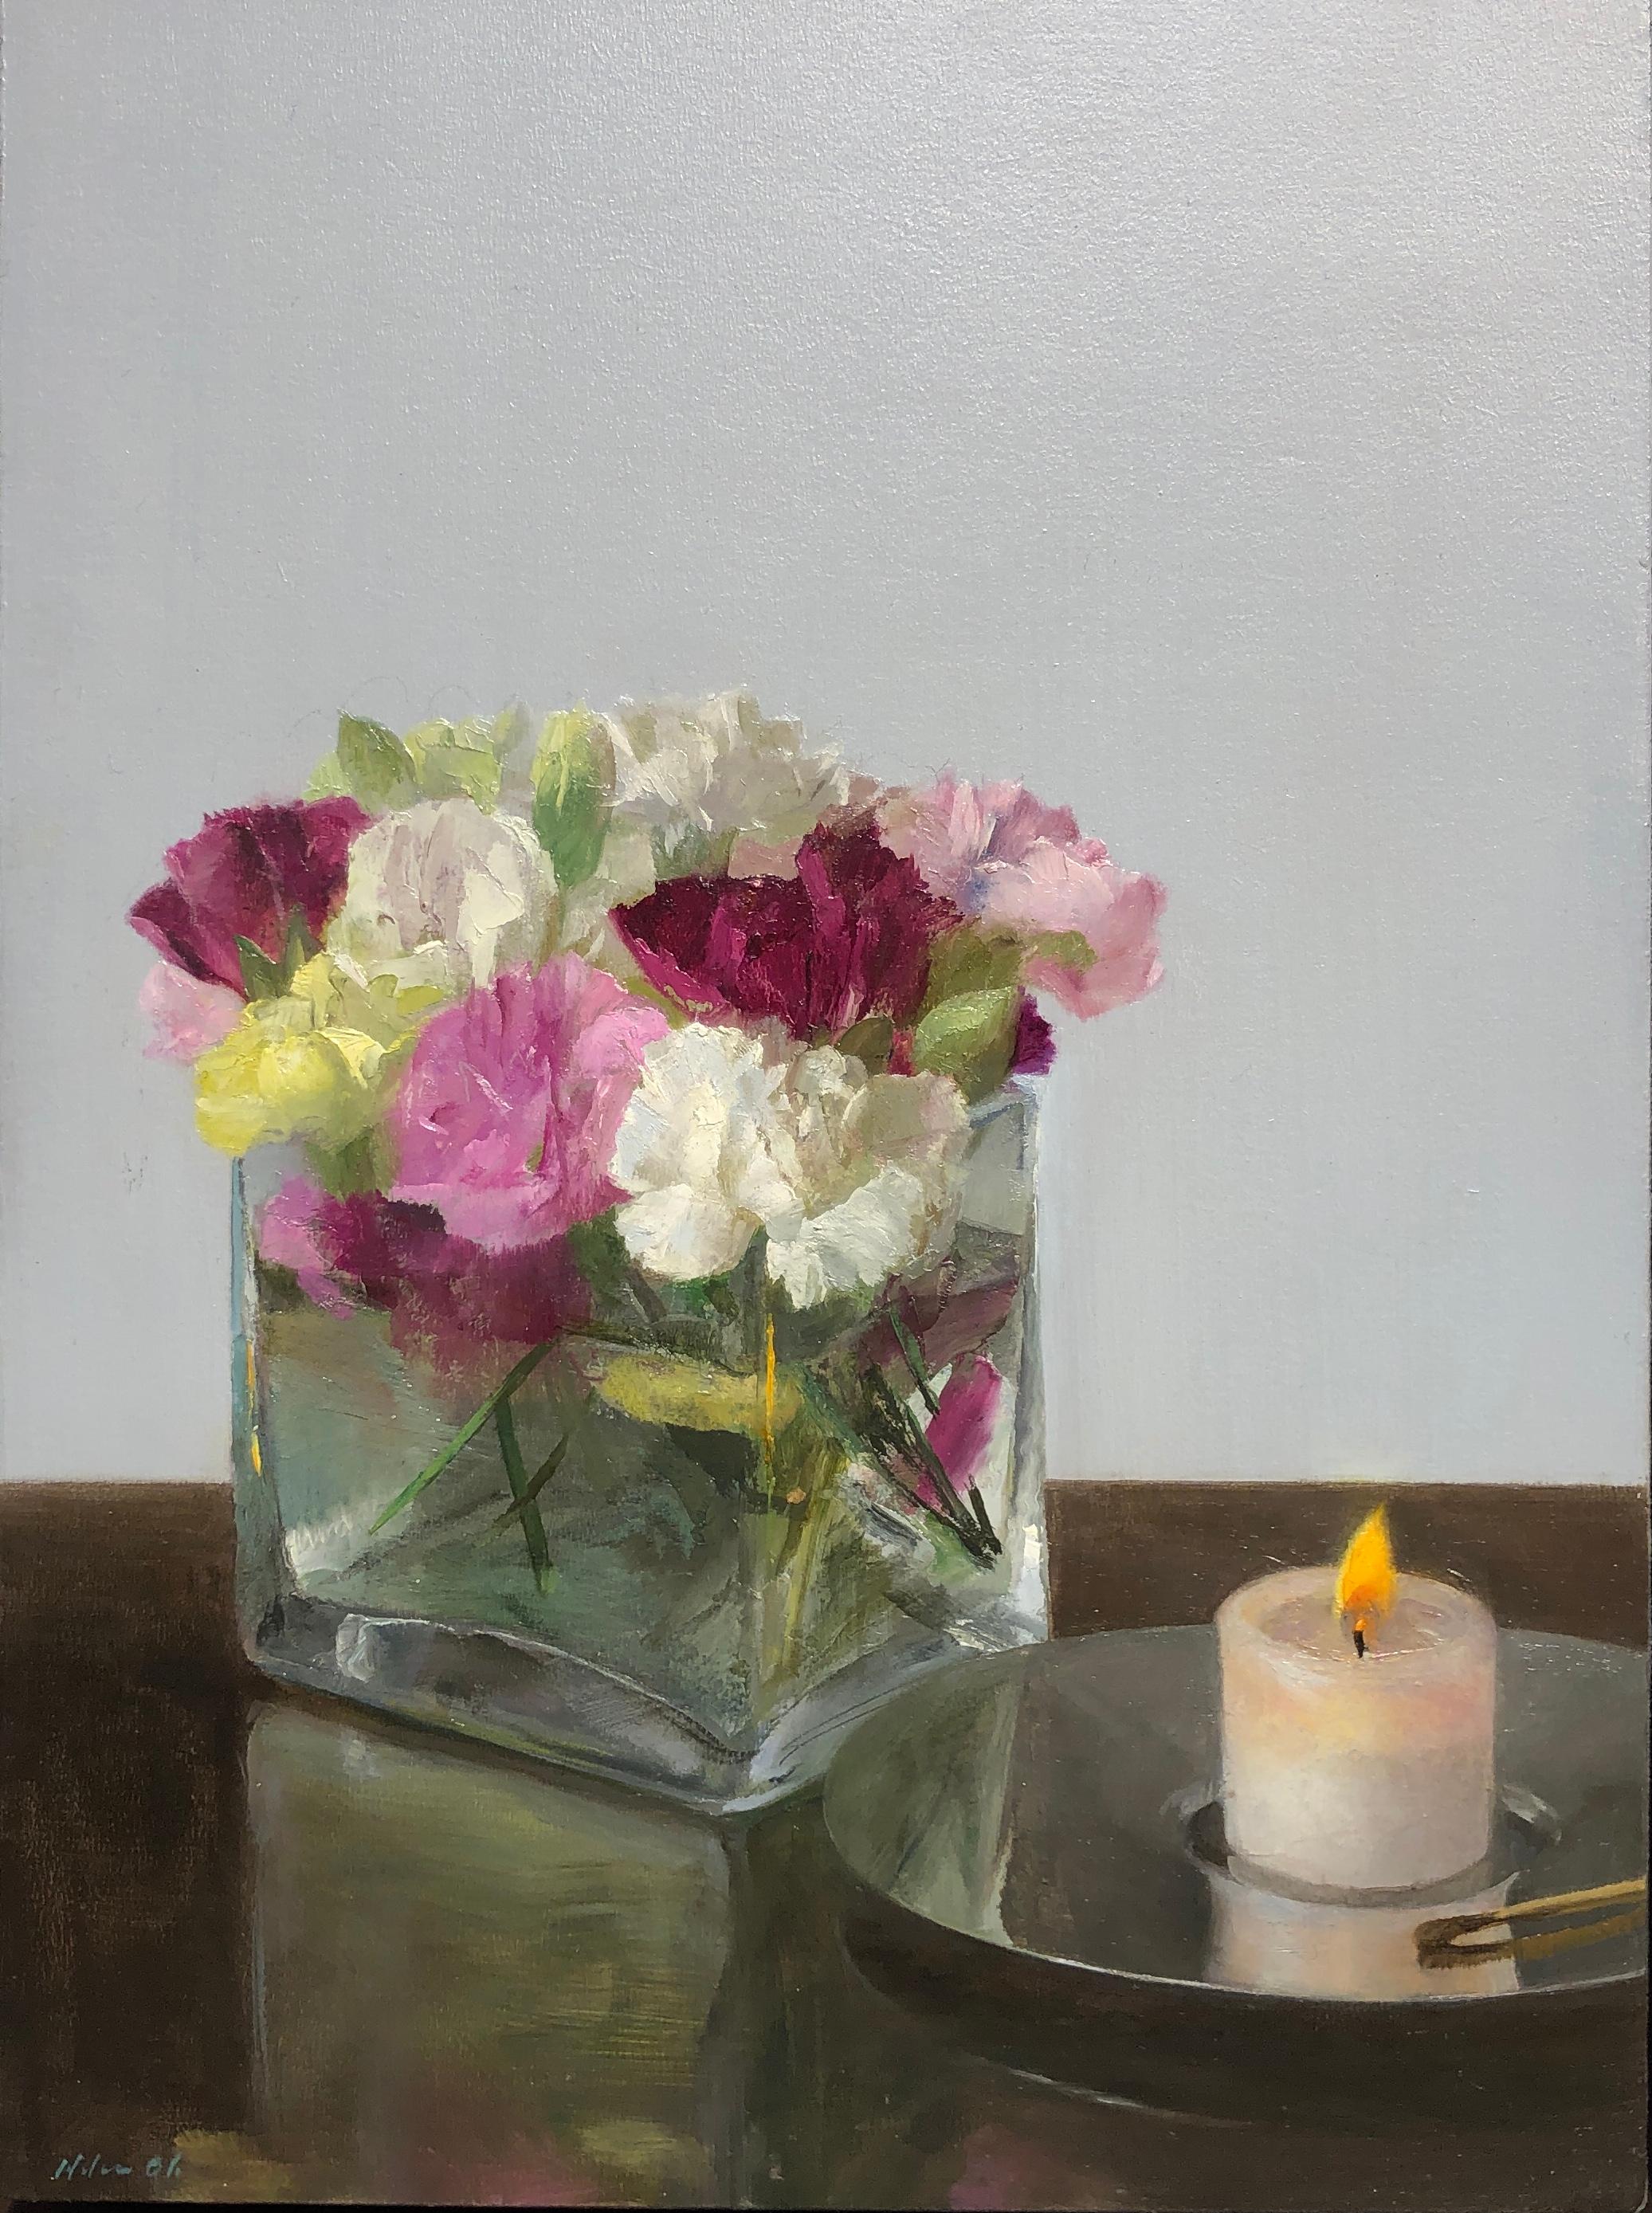 Still Life with a Candle -Glass Vase of Pink & White Flowers with Burning Candle - Painting by Helen Oh